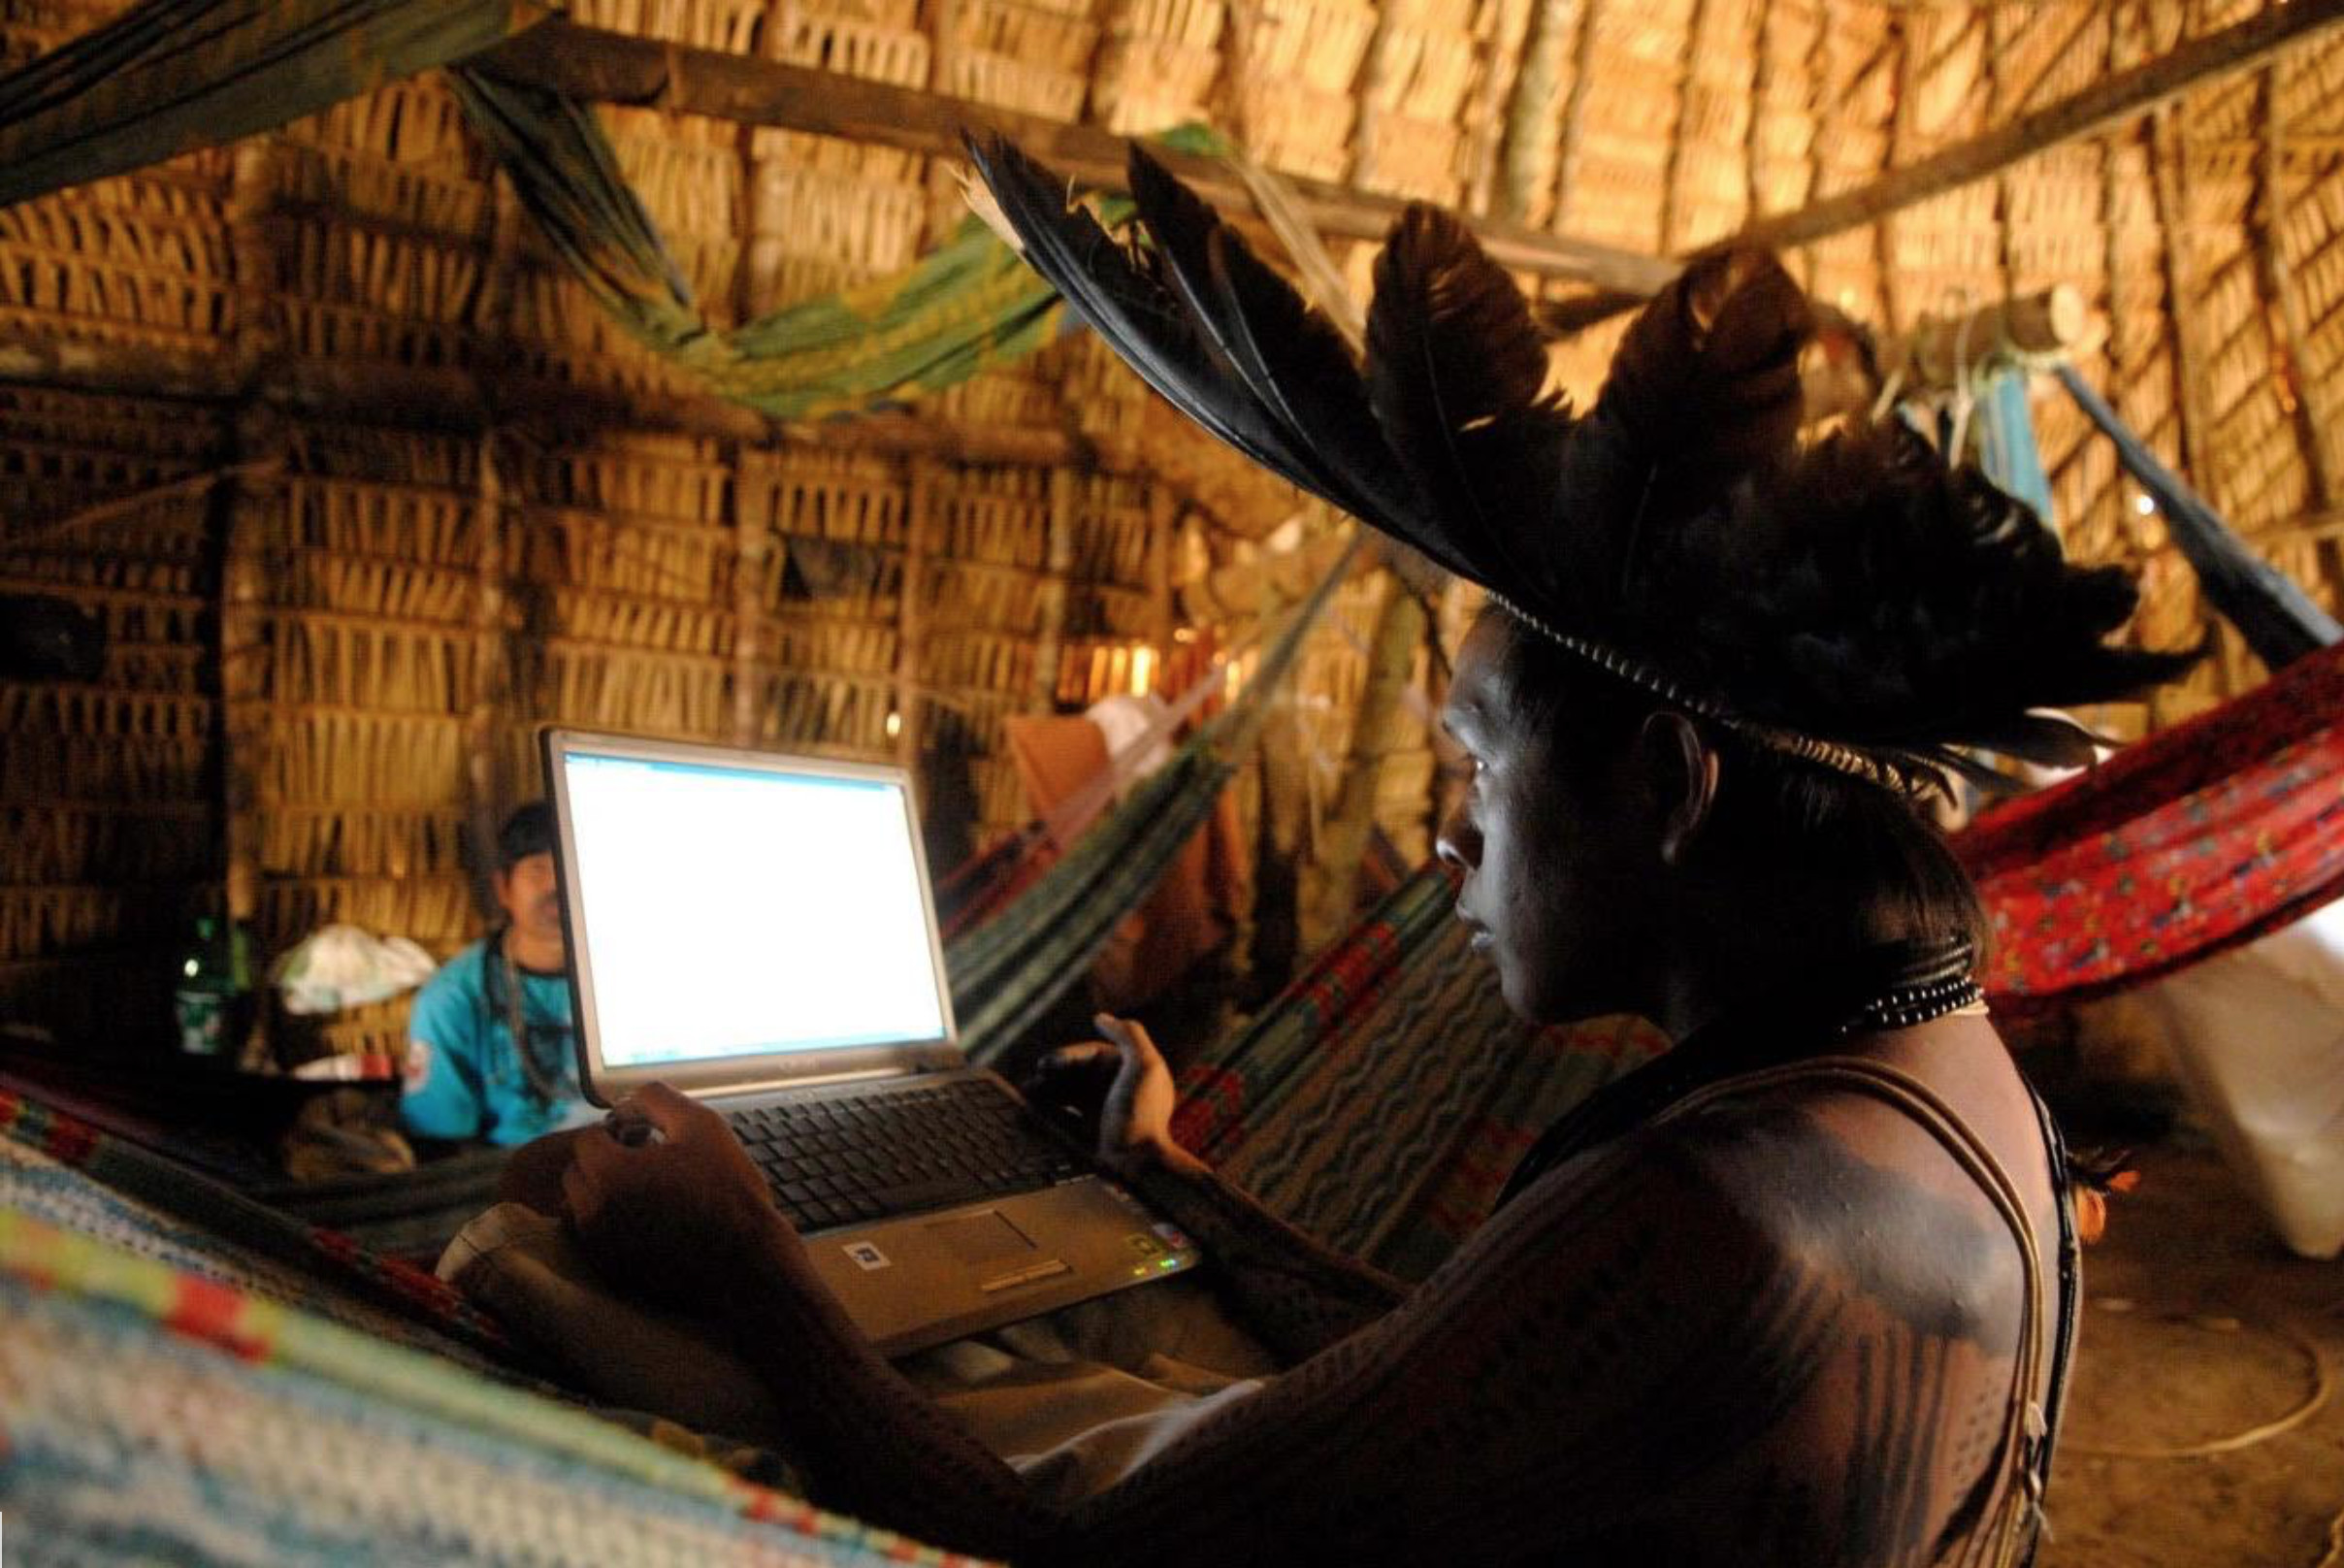 Members from the Surui Paiter Tribe in the Brazilian Amazon access the Internet in their remote community. Credit: Surui Metareila Association Archives. Courtesy of Vasco M. van Roosmalen from ECAM.